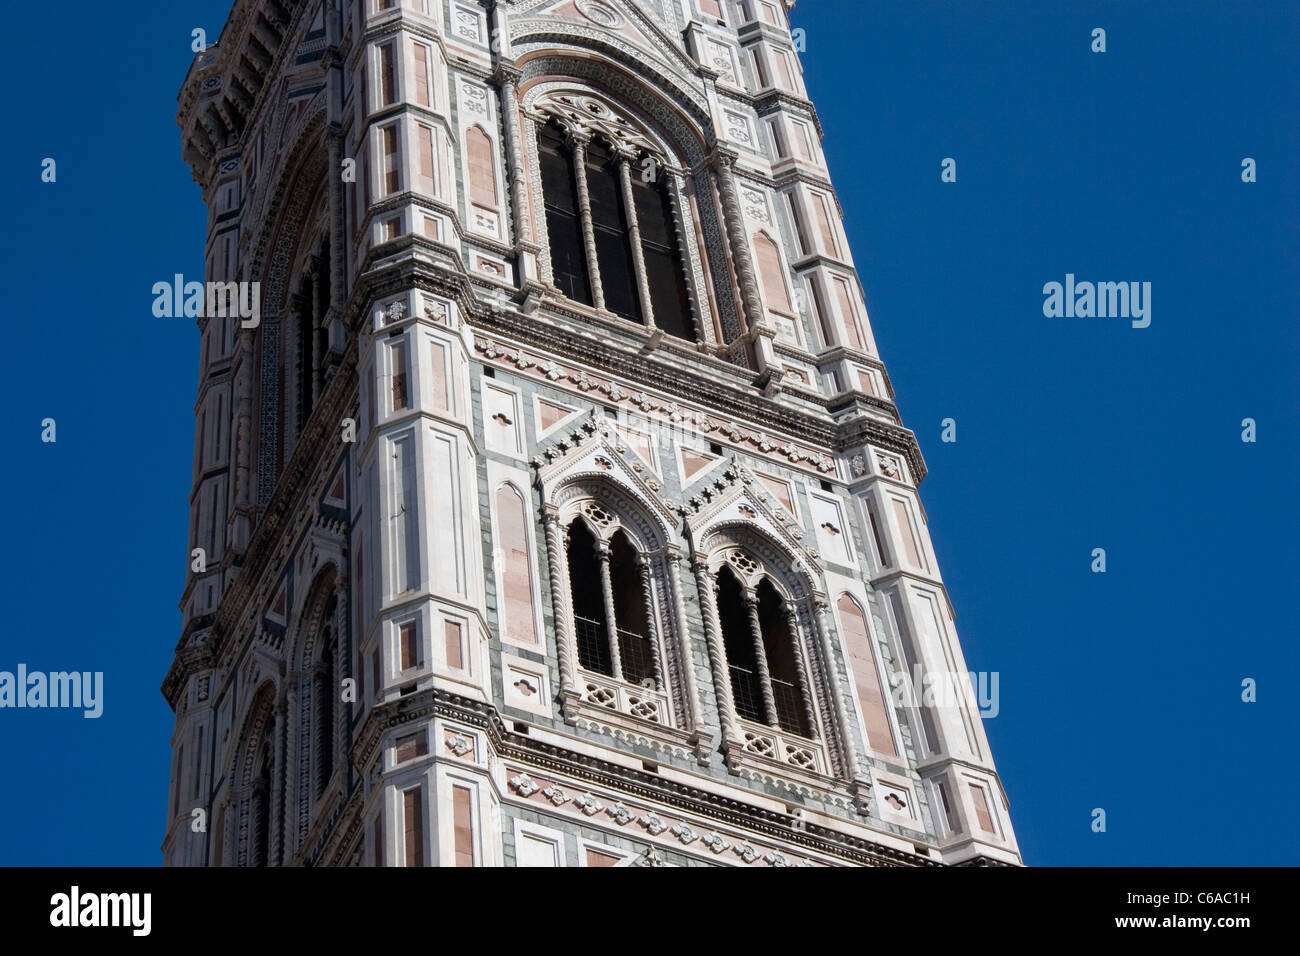 Giotto's Campanile - the bell tower - Florence, Italy Stock Photo